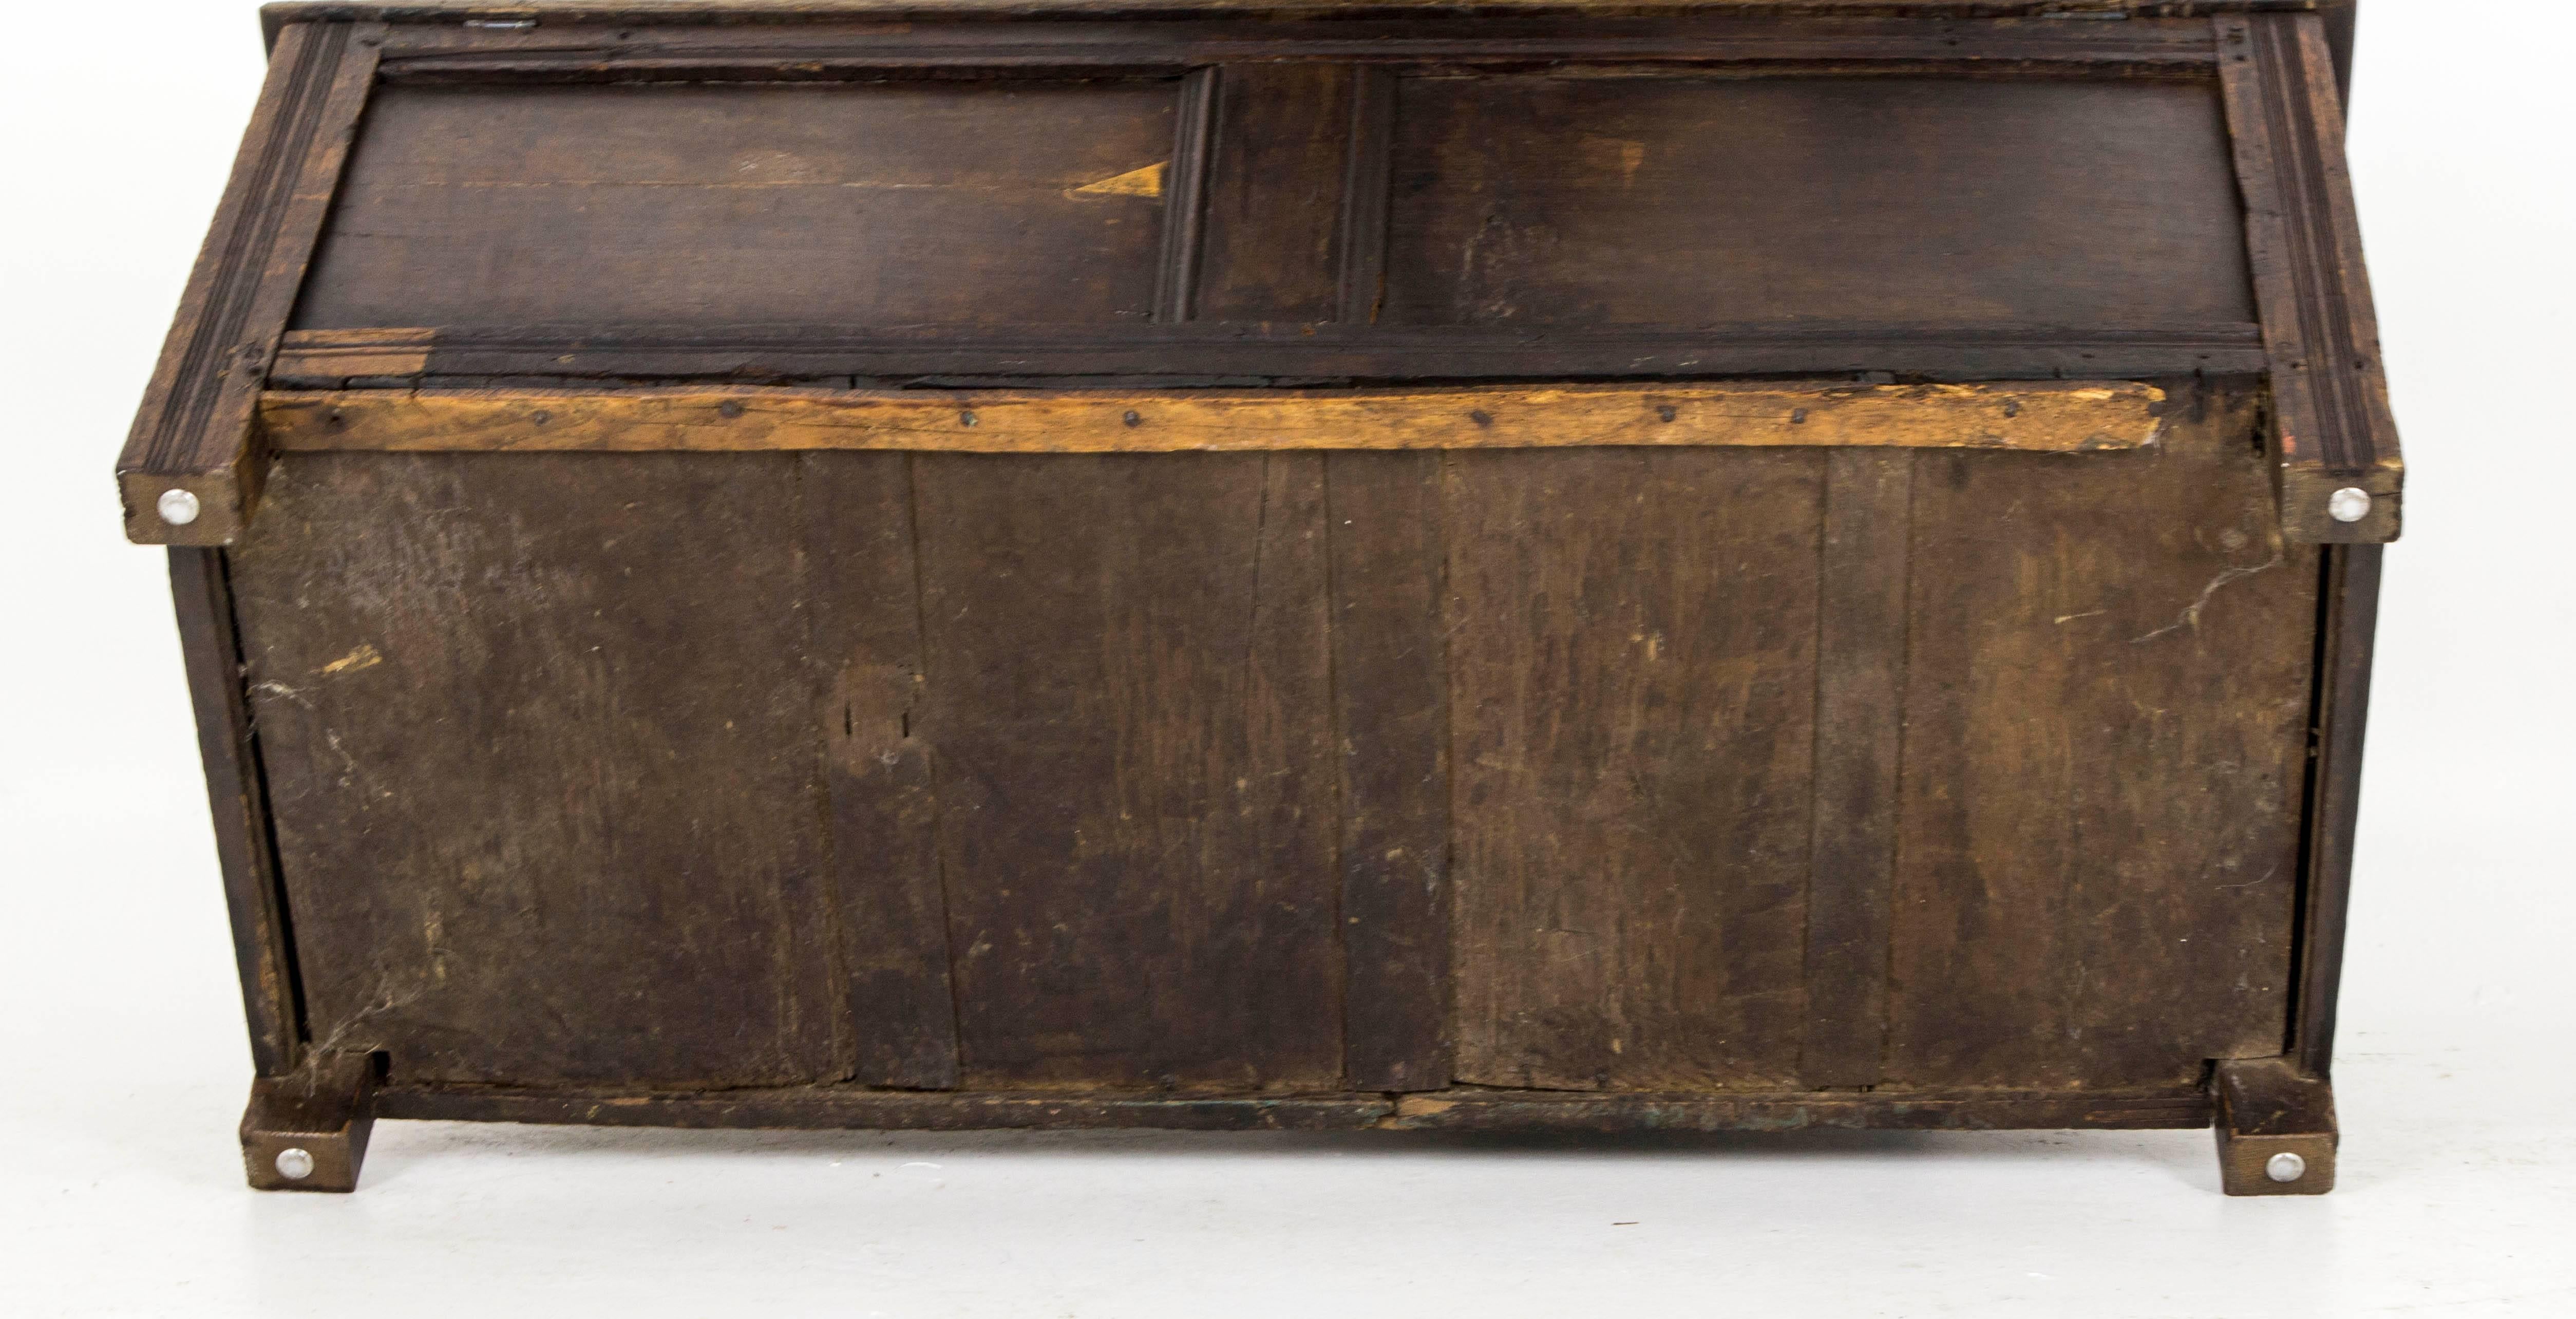 Hand-Carved Antique Scottish 18th Century Jacobean Carved Oak Coffer, Blanket Box, Chest